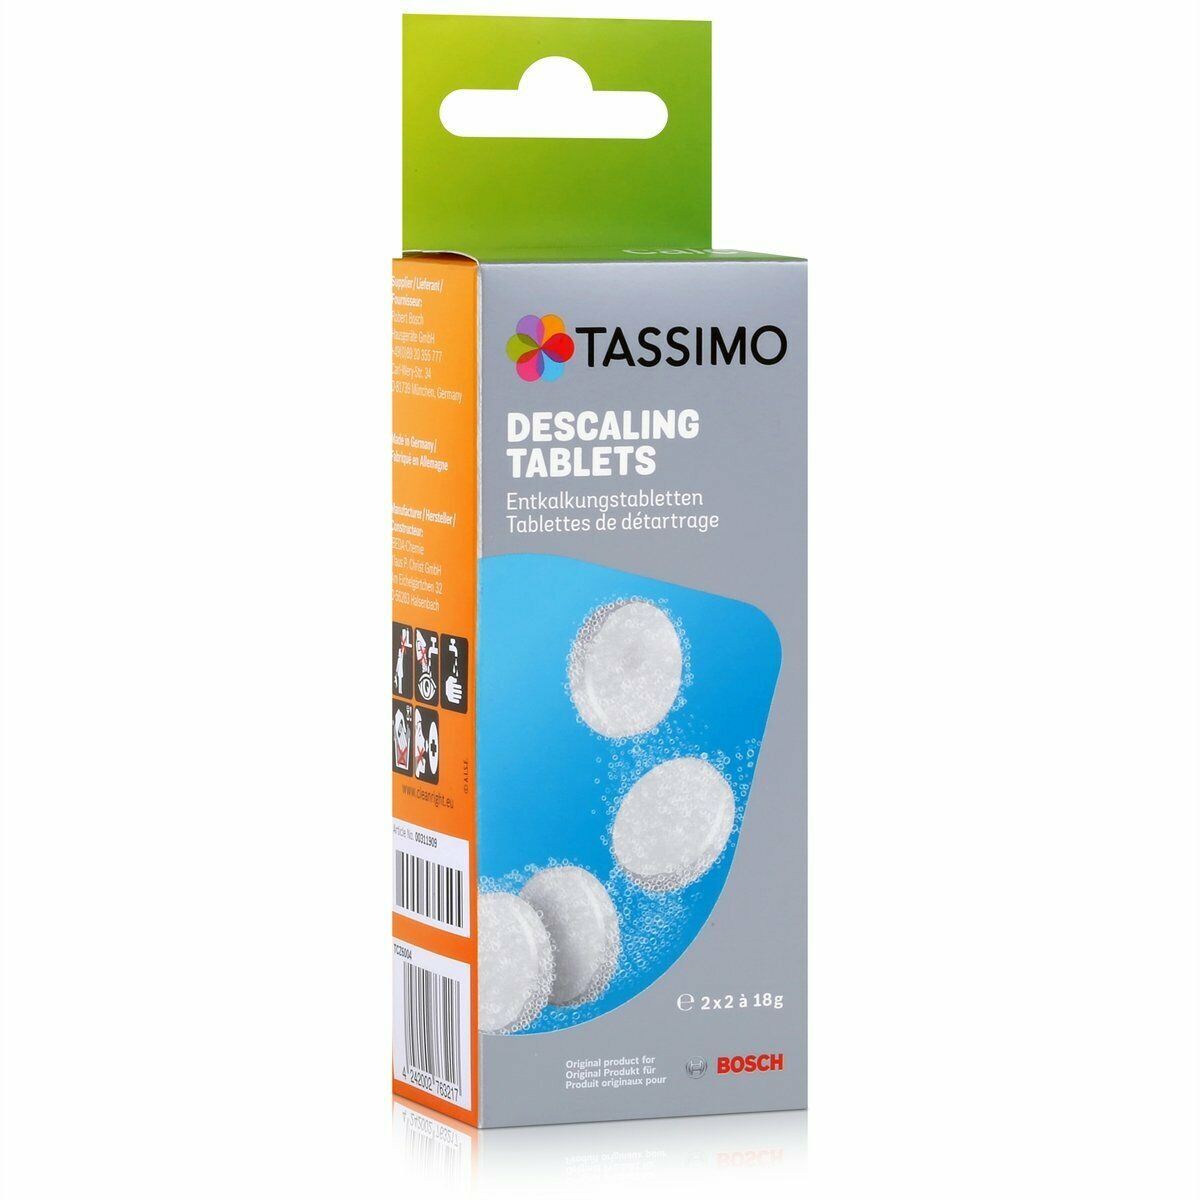 Tassimo by Bosch TCZ6004 Descaling Tablets - 4 Tablets